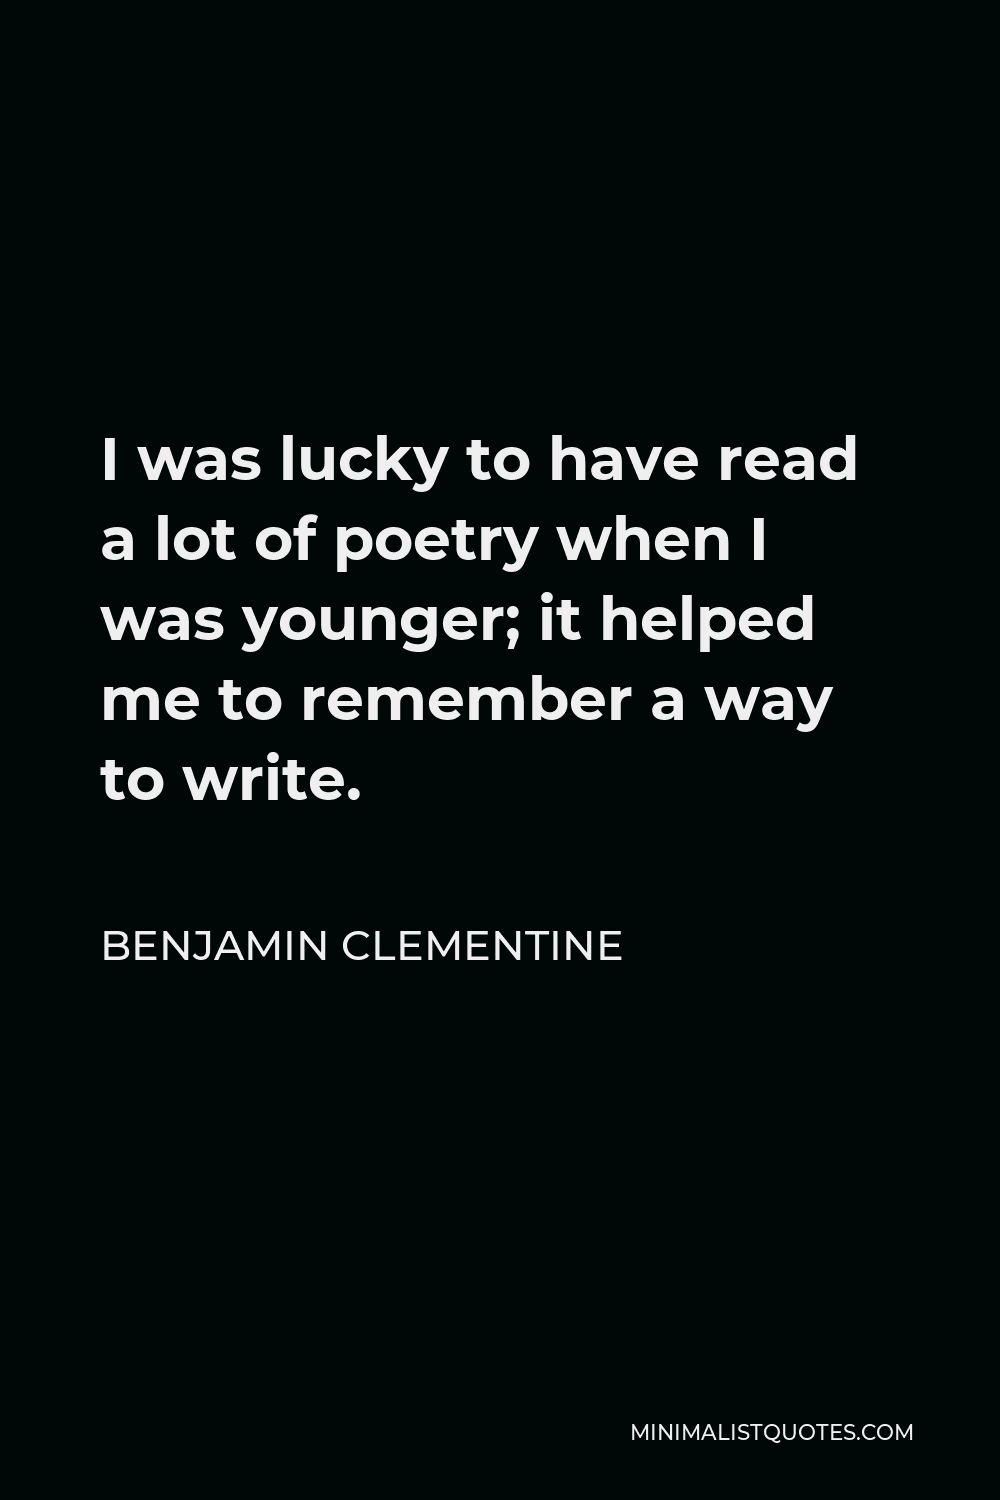 Benjamin Clementine Quote - I was lucky to have read a lot of poetry when I was younger; it helped me to remember a way to write.